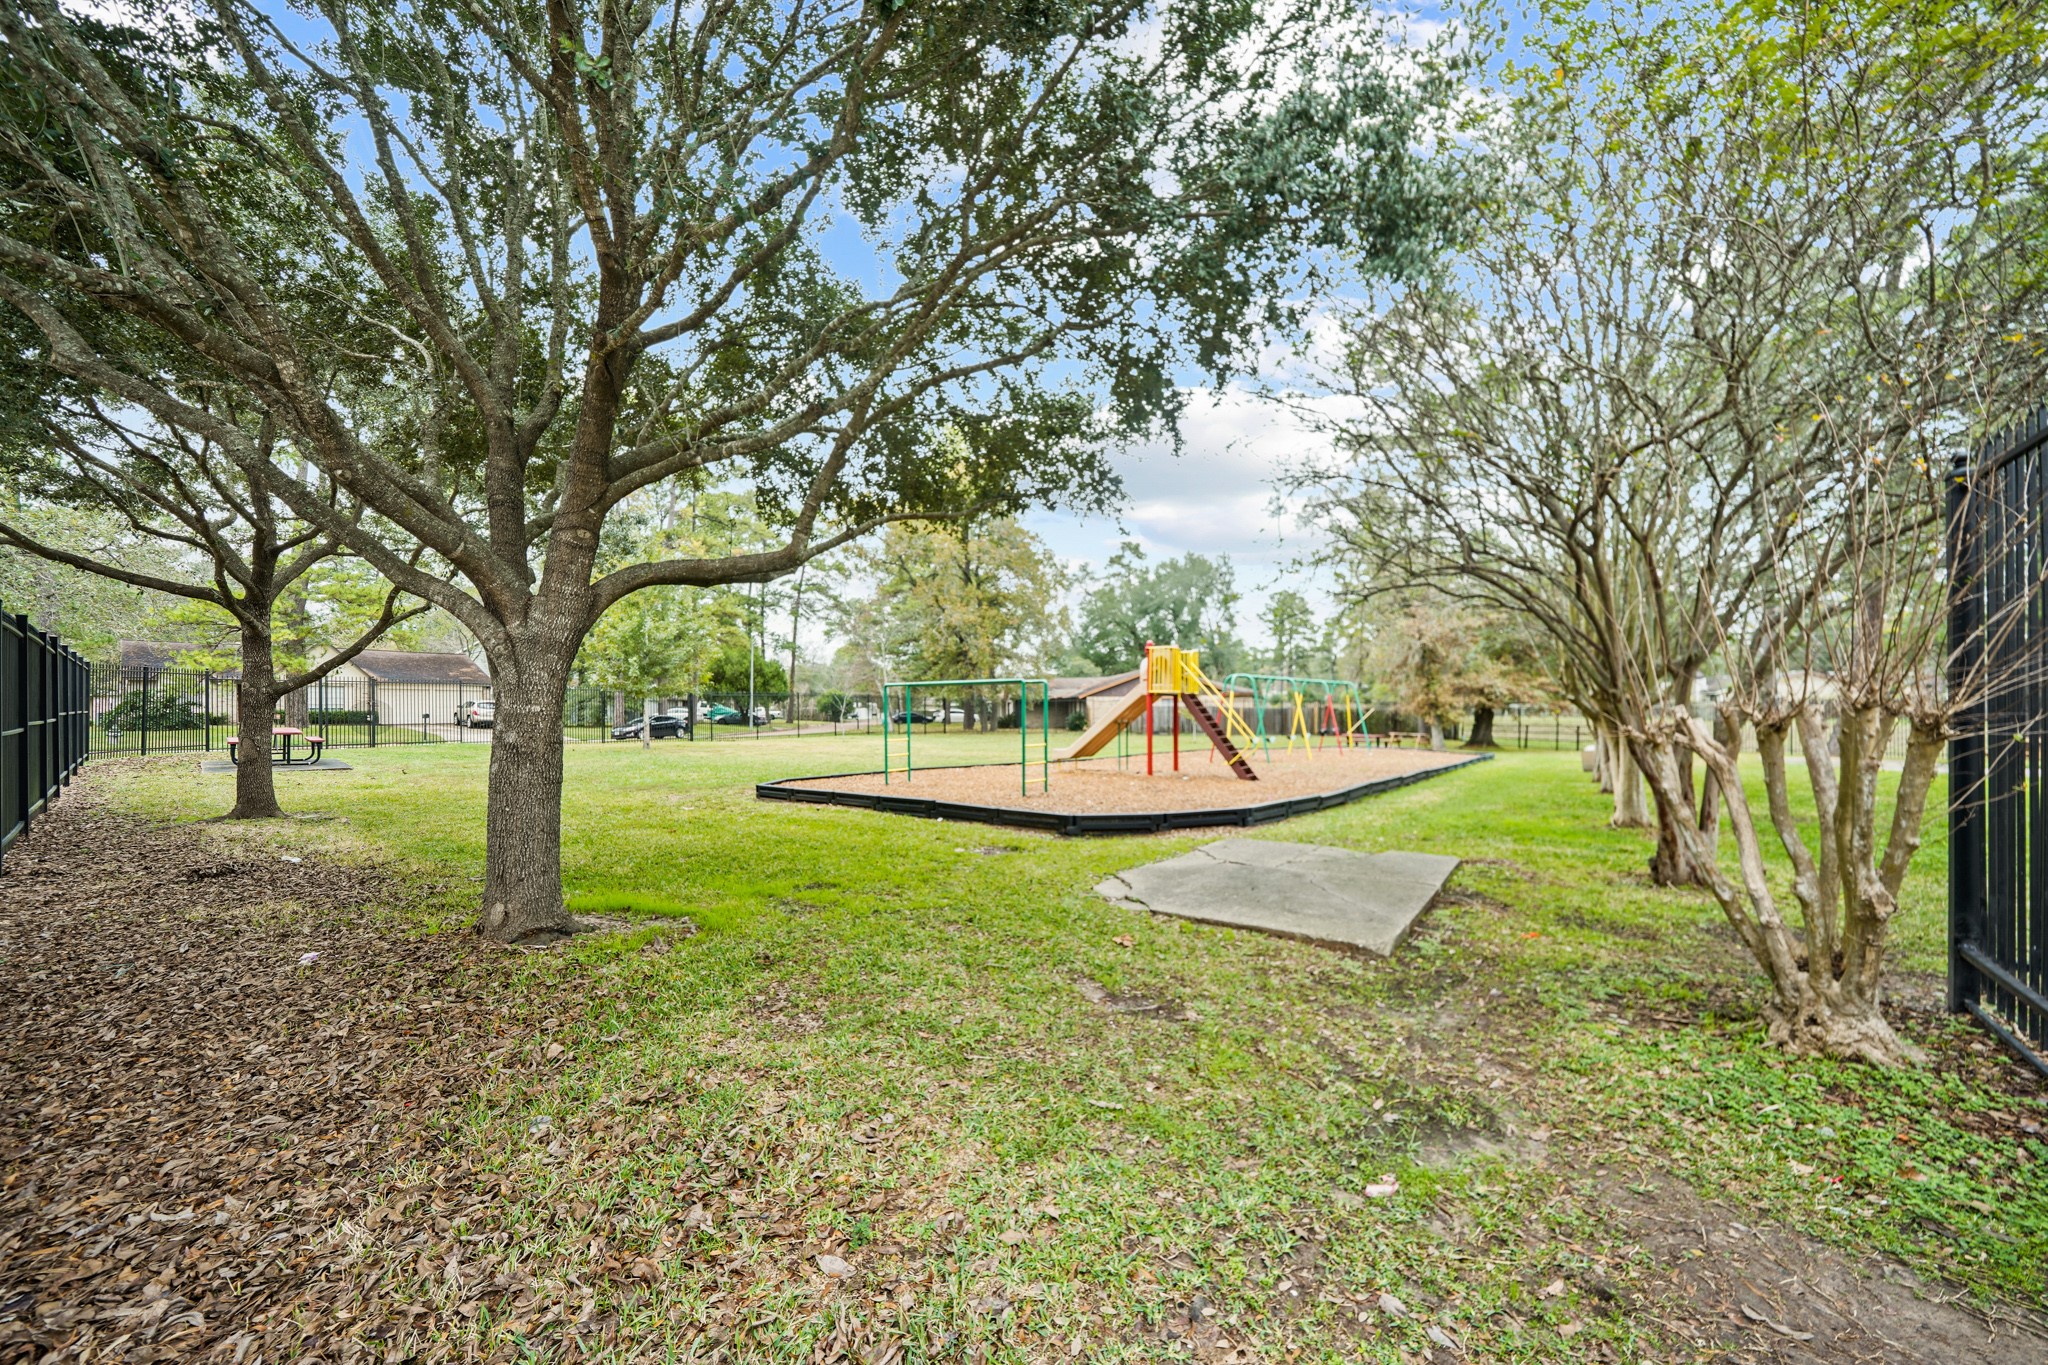 The littles will love a day at the park. The neighborhood amenities include a fabulous park with a playground and picnic areas.